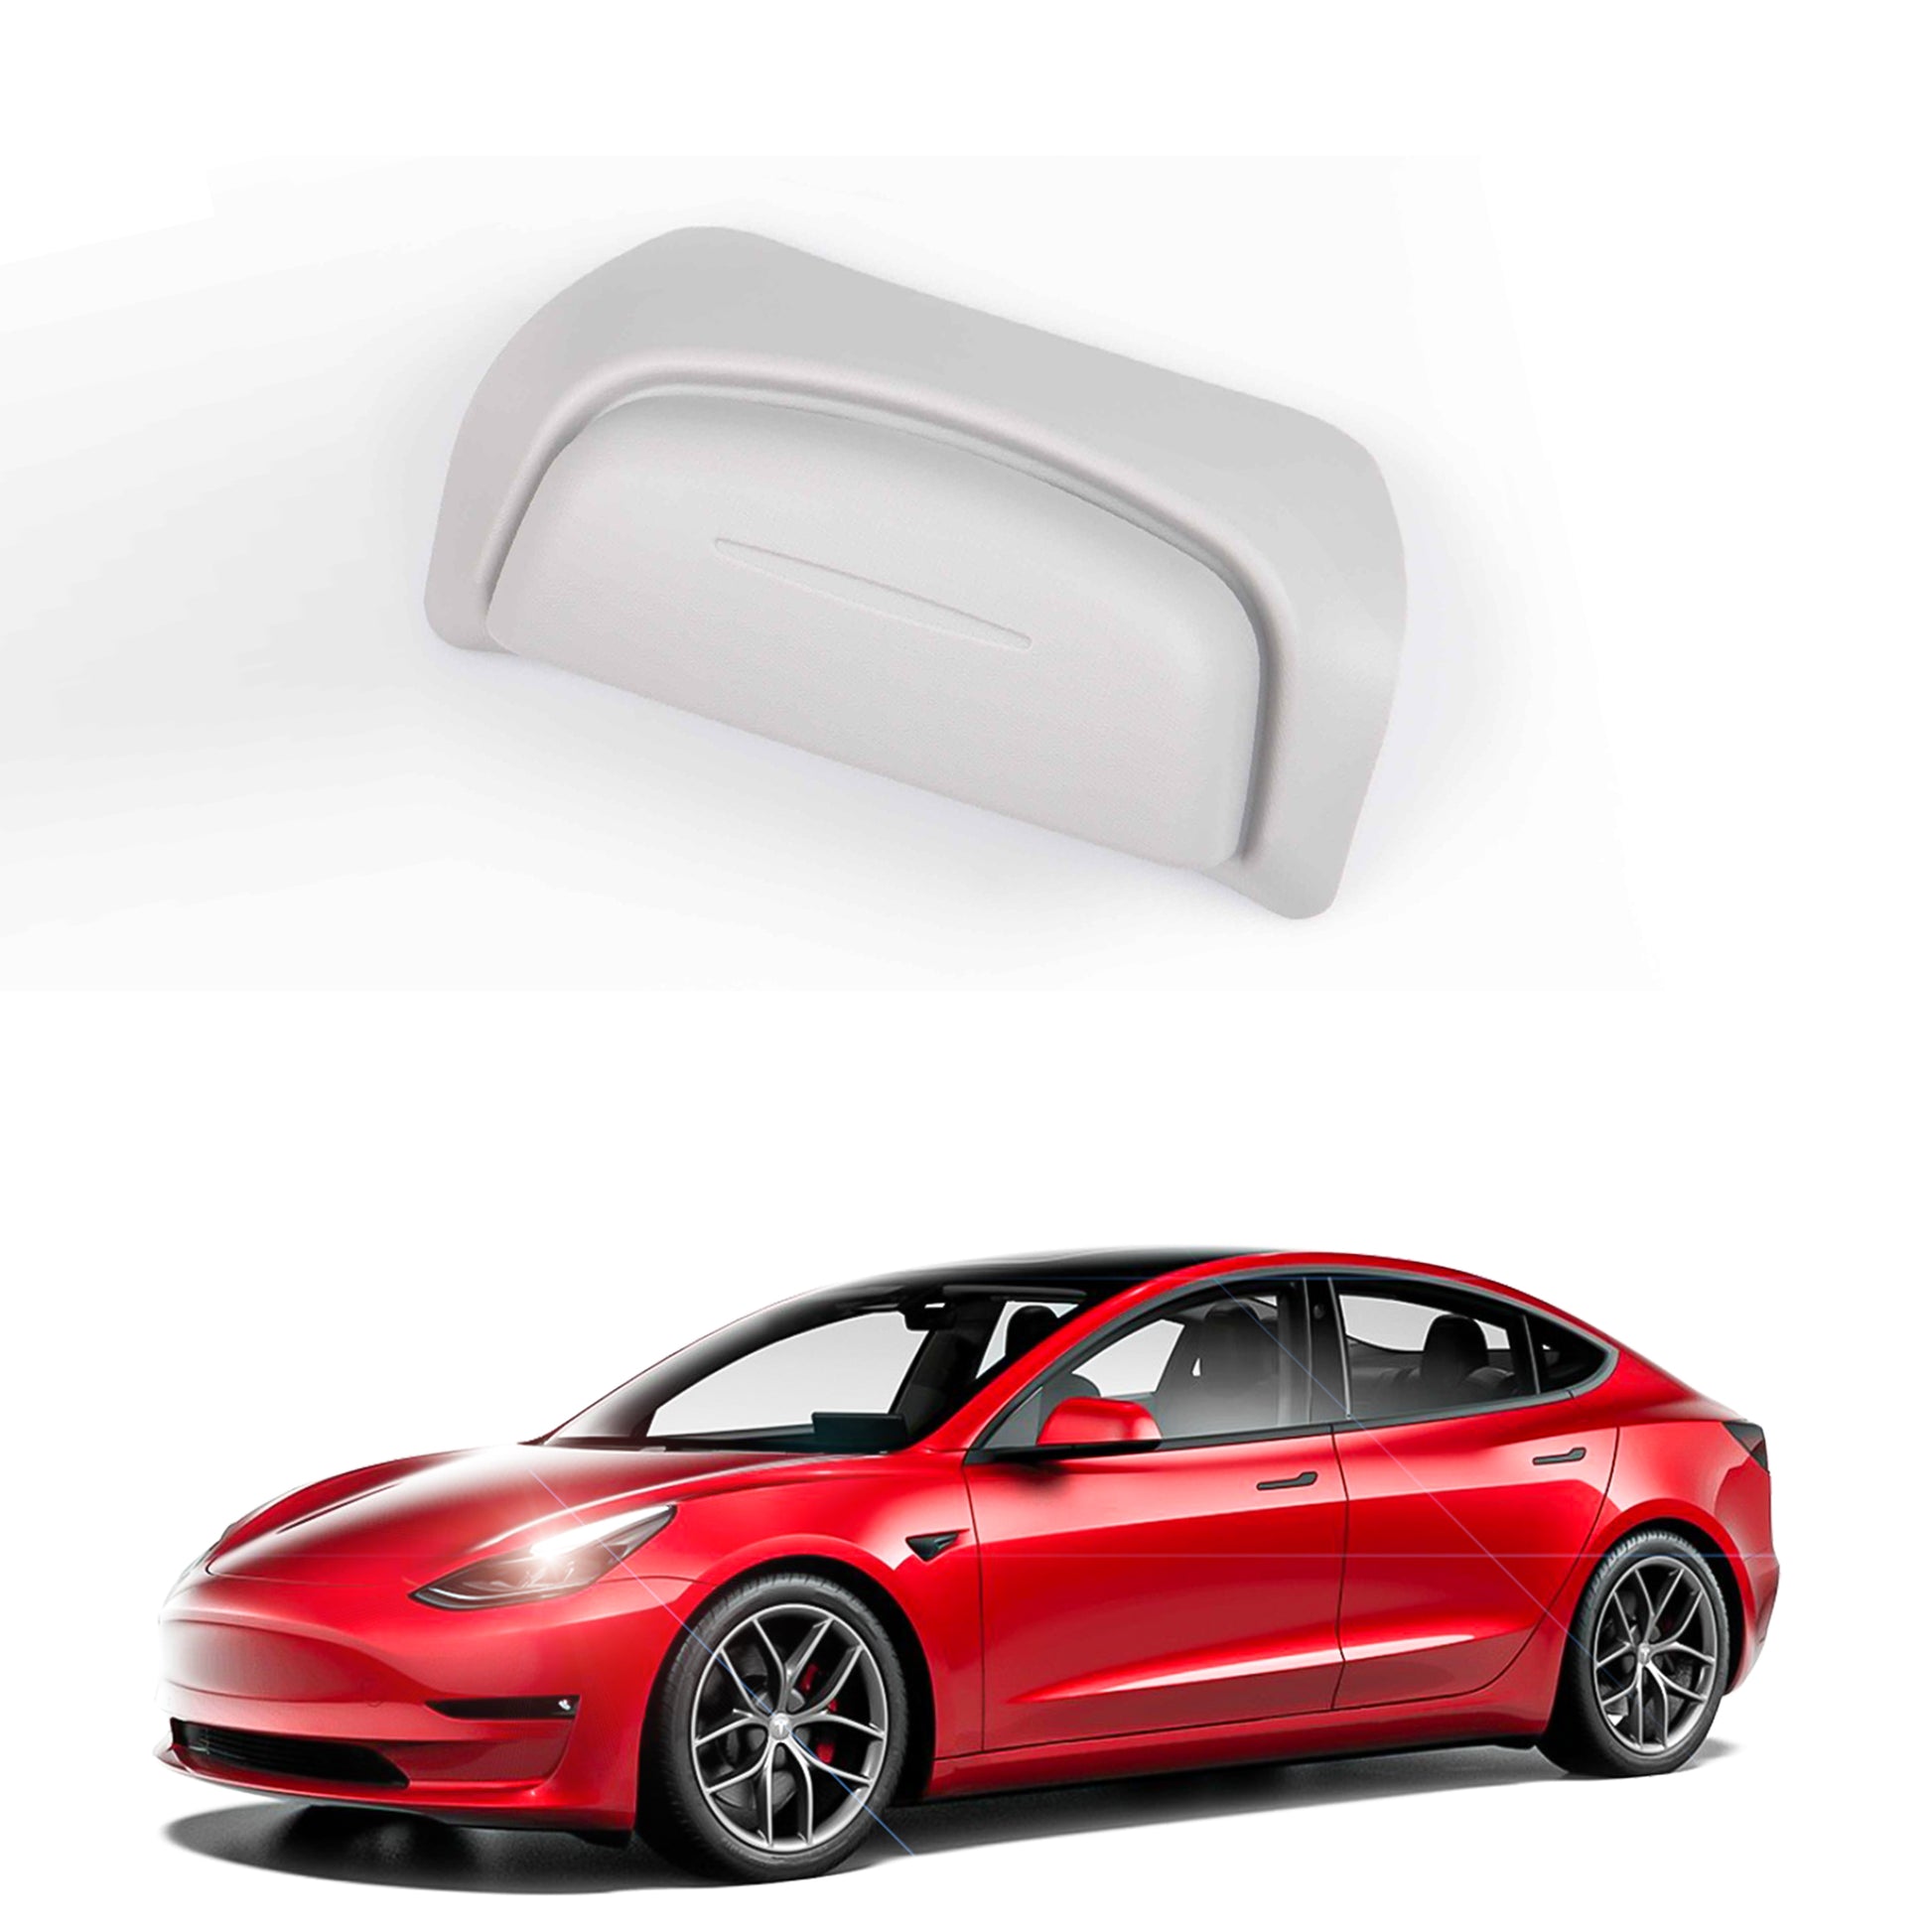 tesla model 3 Y car 2022 2023 2021 2020 2019 2018 s3xy Sunglasses Storage Box arcoche accessories accessory aftermarket price Vehicles standard long range performance sr+ electric car rwd ev interior exterior diy decoration price elon musk must have black white red blue 5 7 seats seat